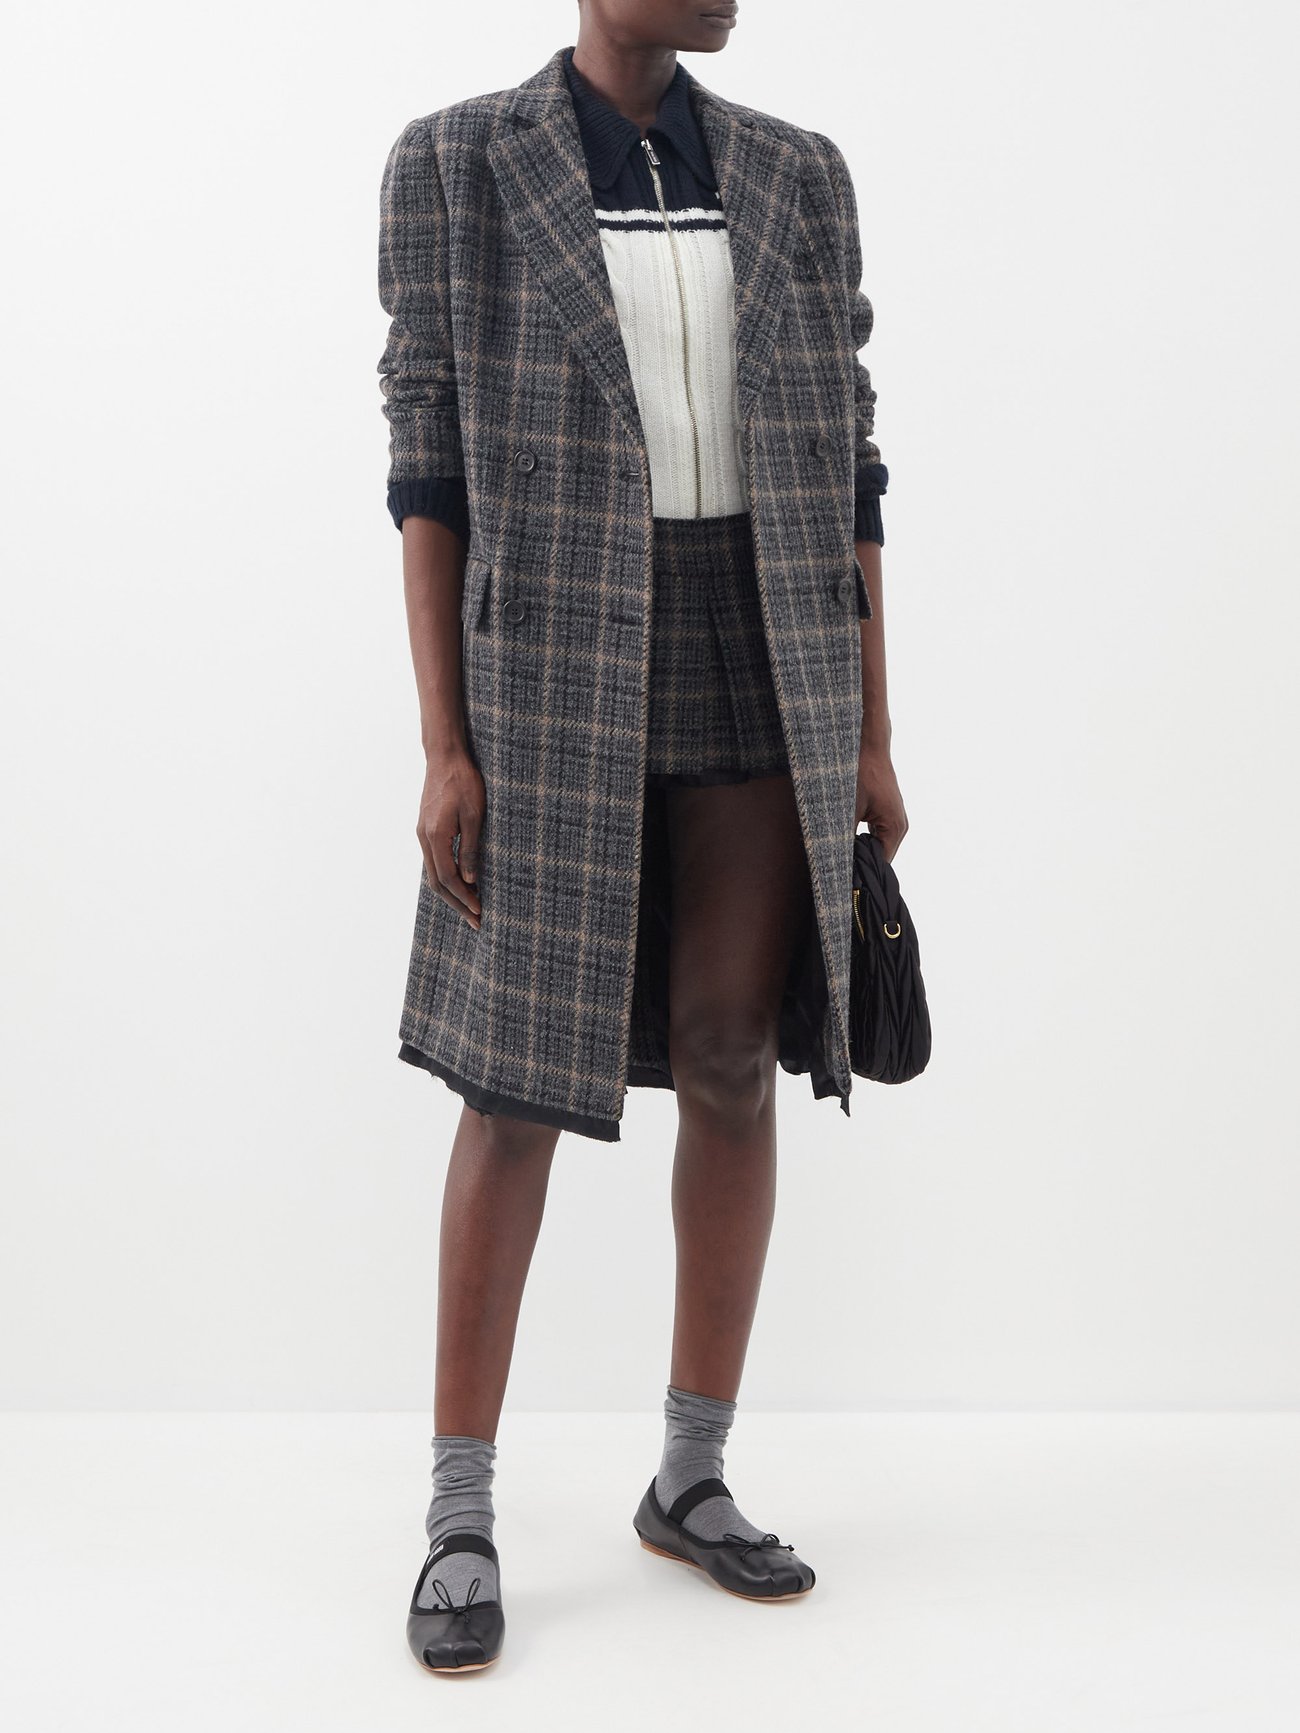 Miu Miu's grey coat features in Look 26 of the AW22 runway, and is tailored to the collection's boxy oversized fit from raw-edged tartan wool. It comes in a grey check and is double breasted with a button fastening. It has notch lapels, cropped sleeves, flap pockets, and a back vent. Wear with the labels mirco mini pleated skirt in the same fabric to lean into AW22s punk preppy trend. 